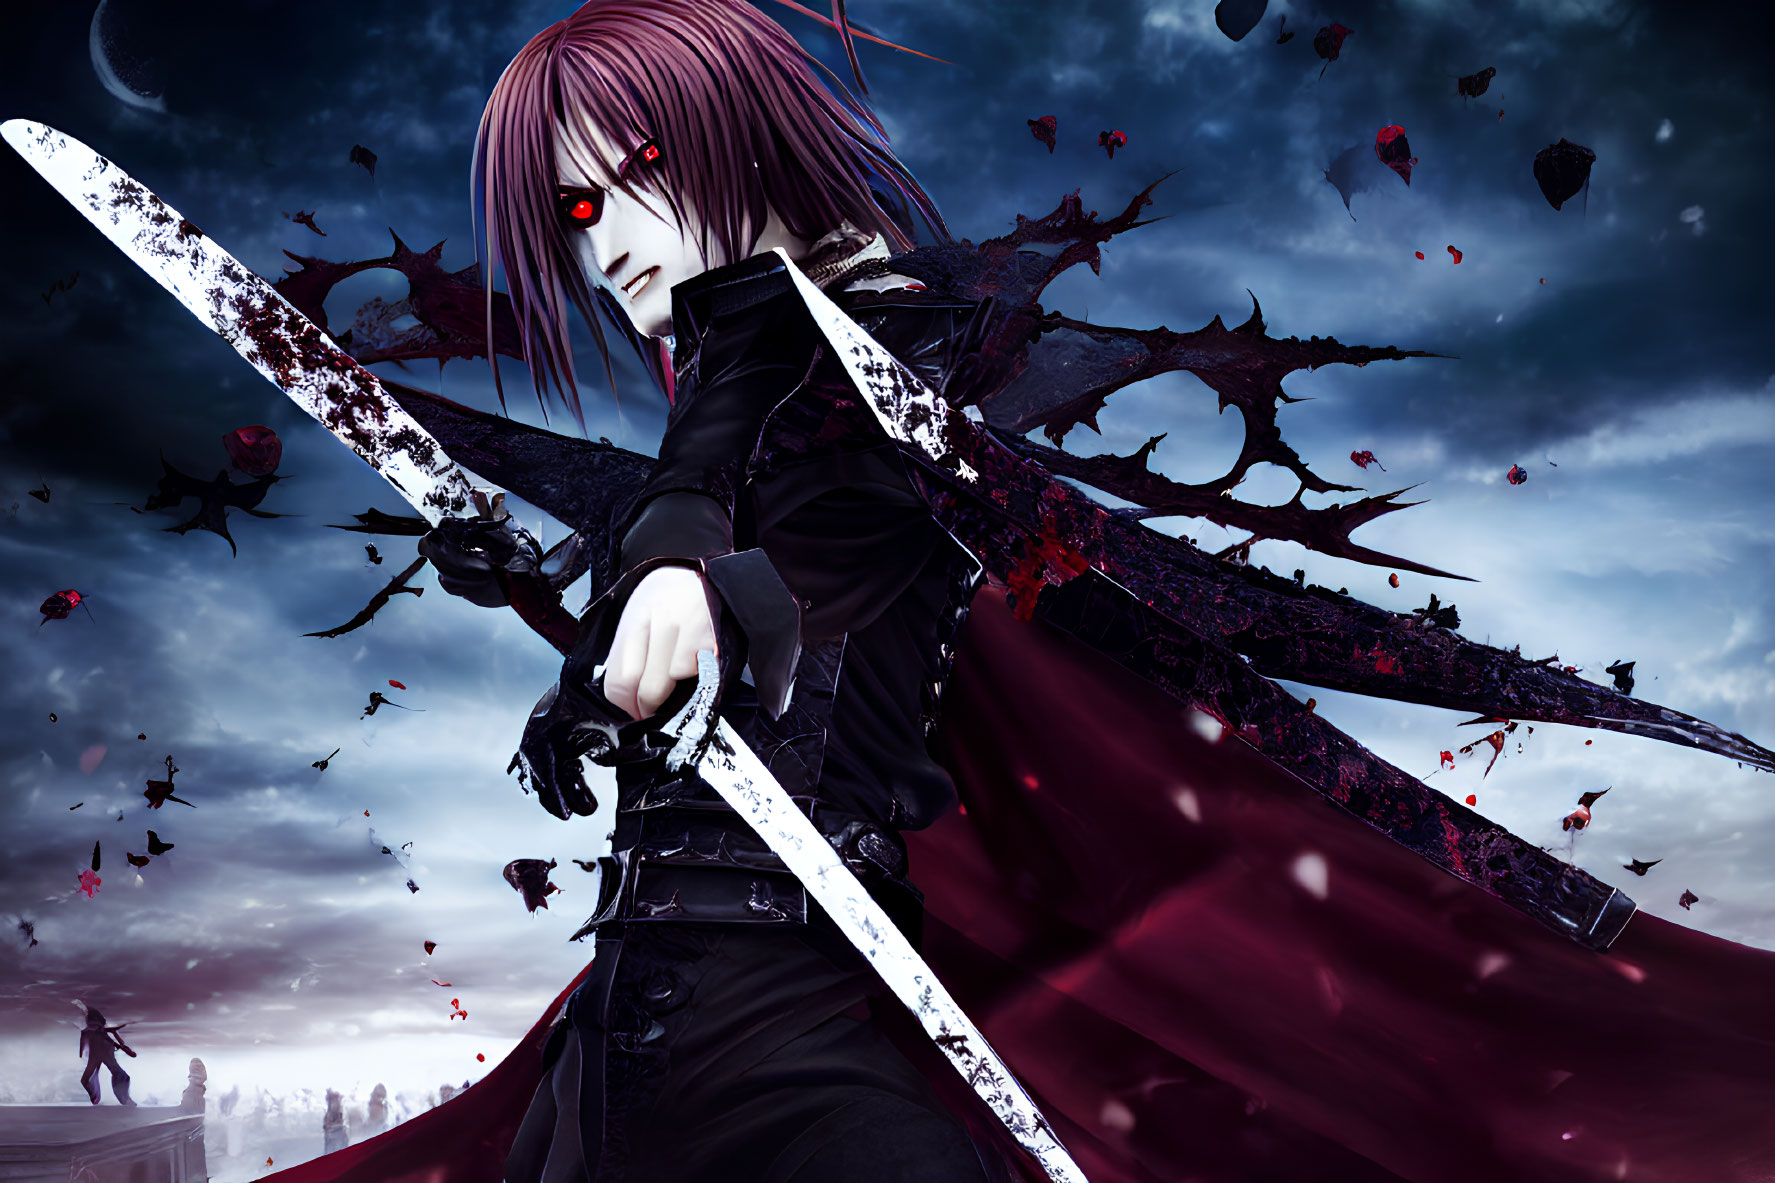 Anime character with red eyes and purple hair wielding a large sword in a dark, chaotic setting